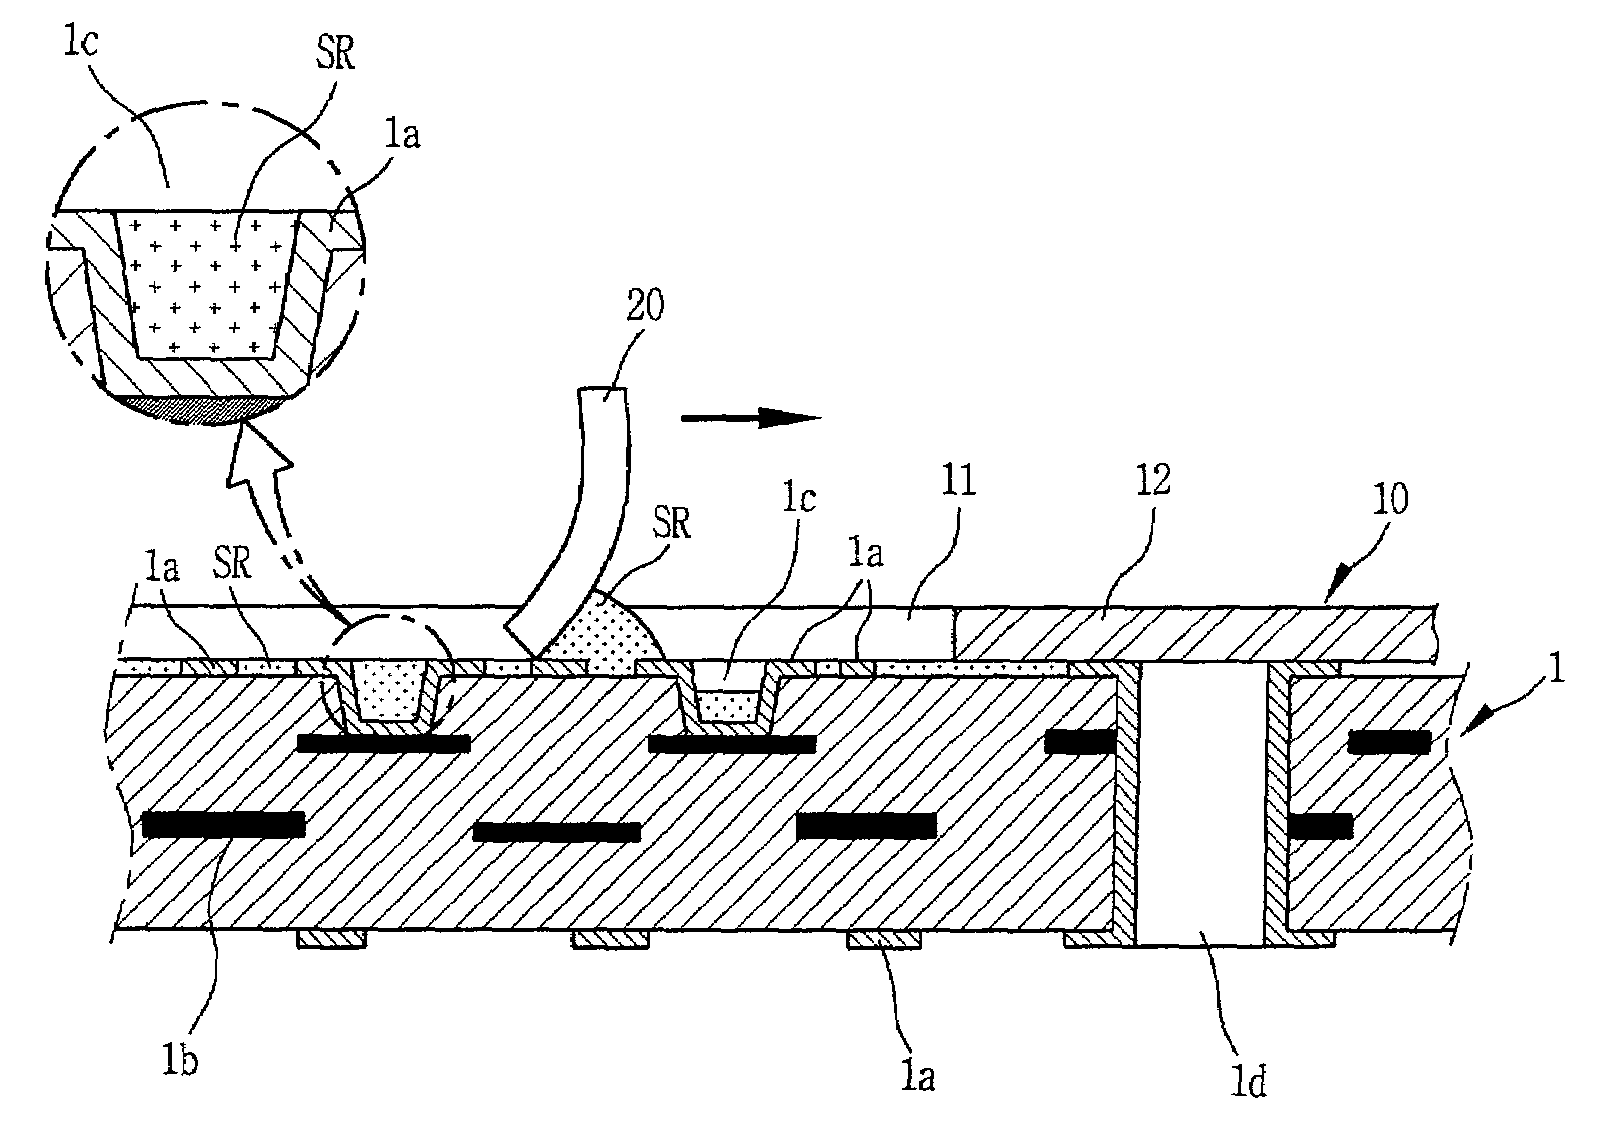 Method for plugging holes in a printed circuit board